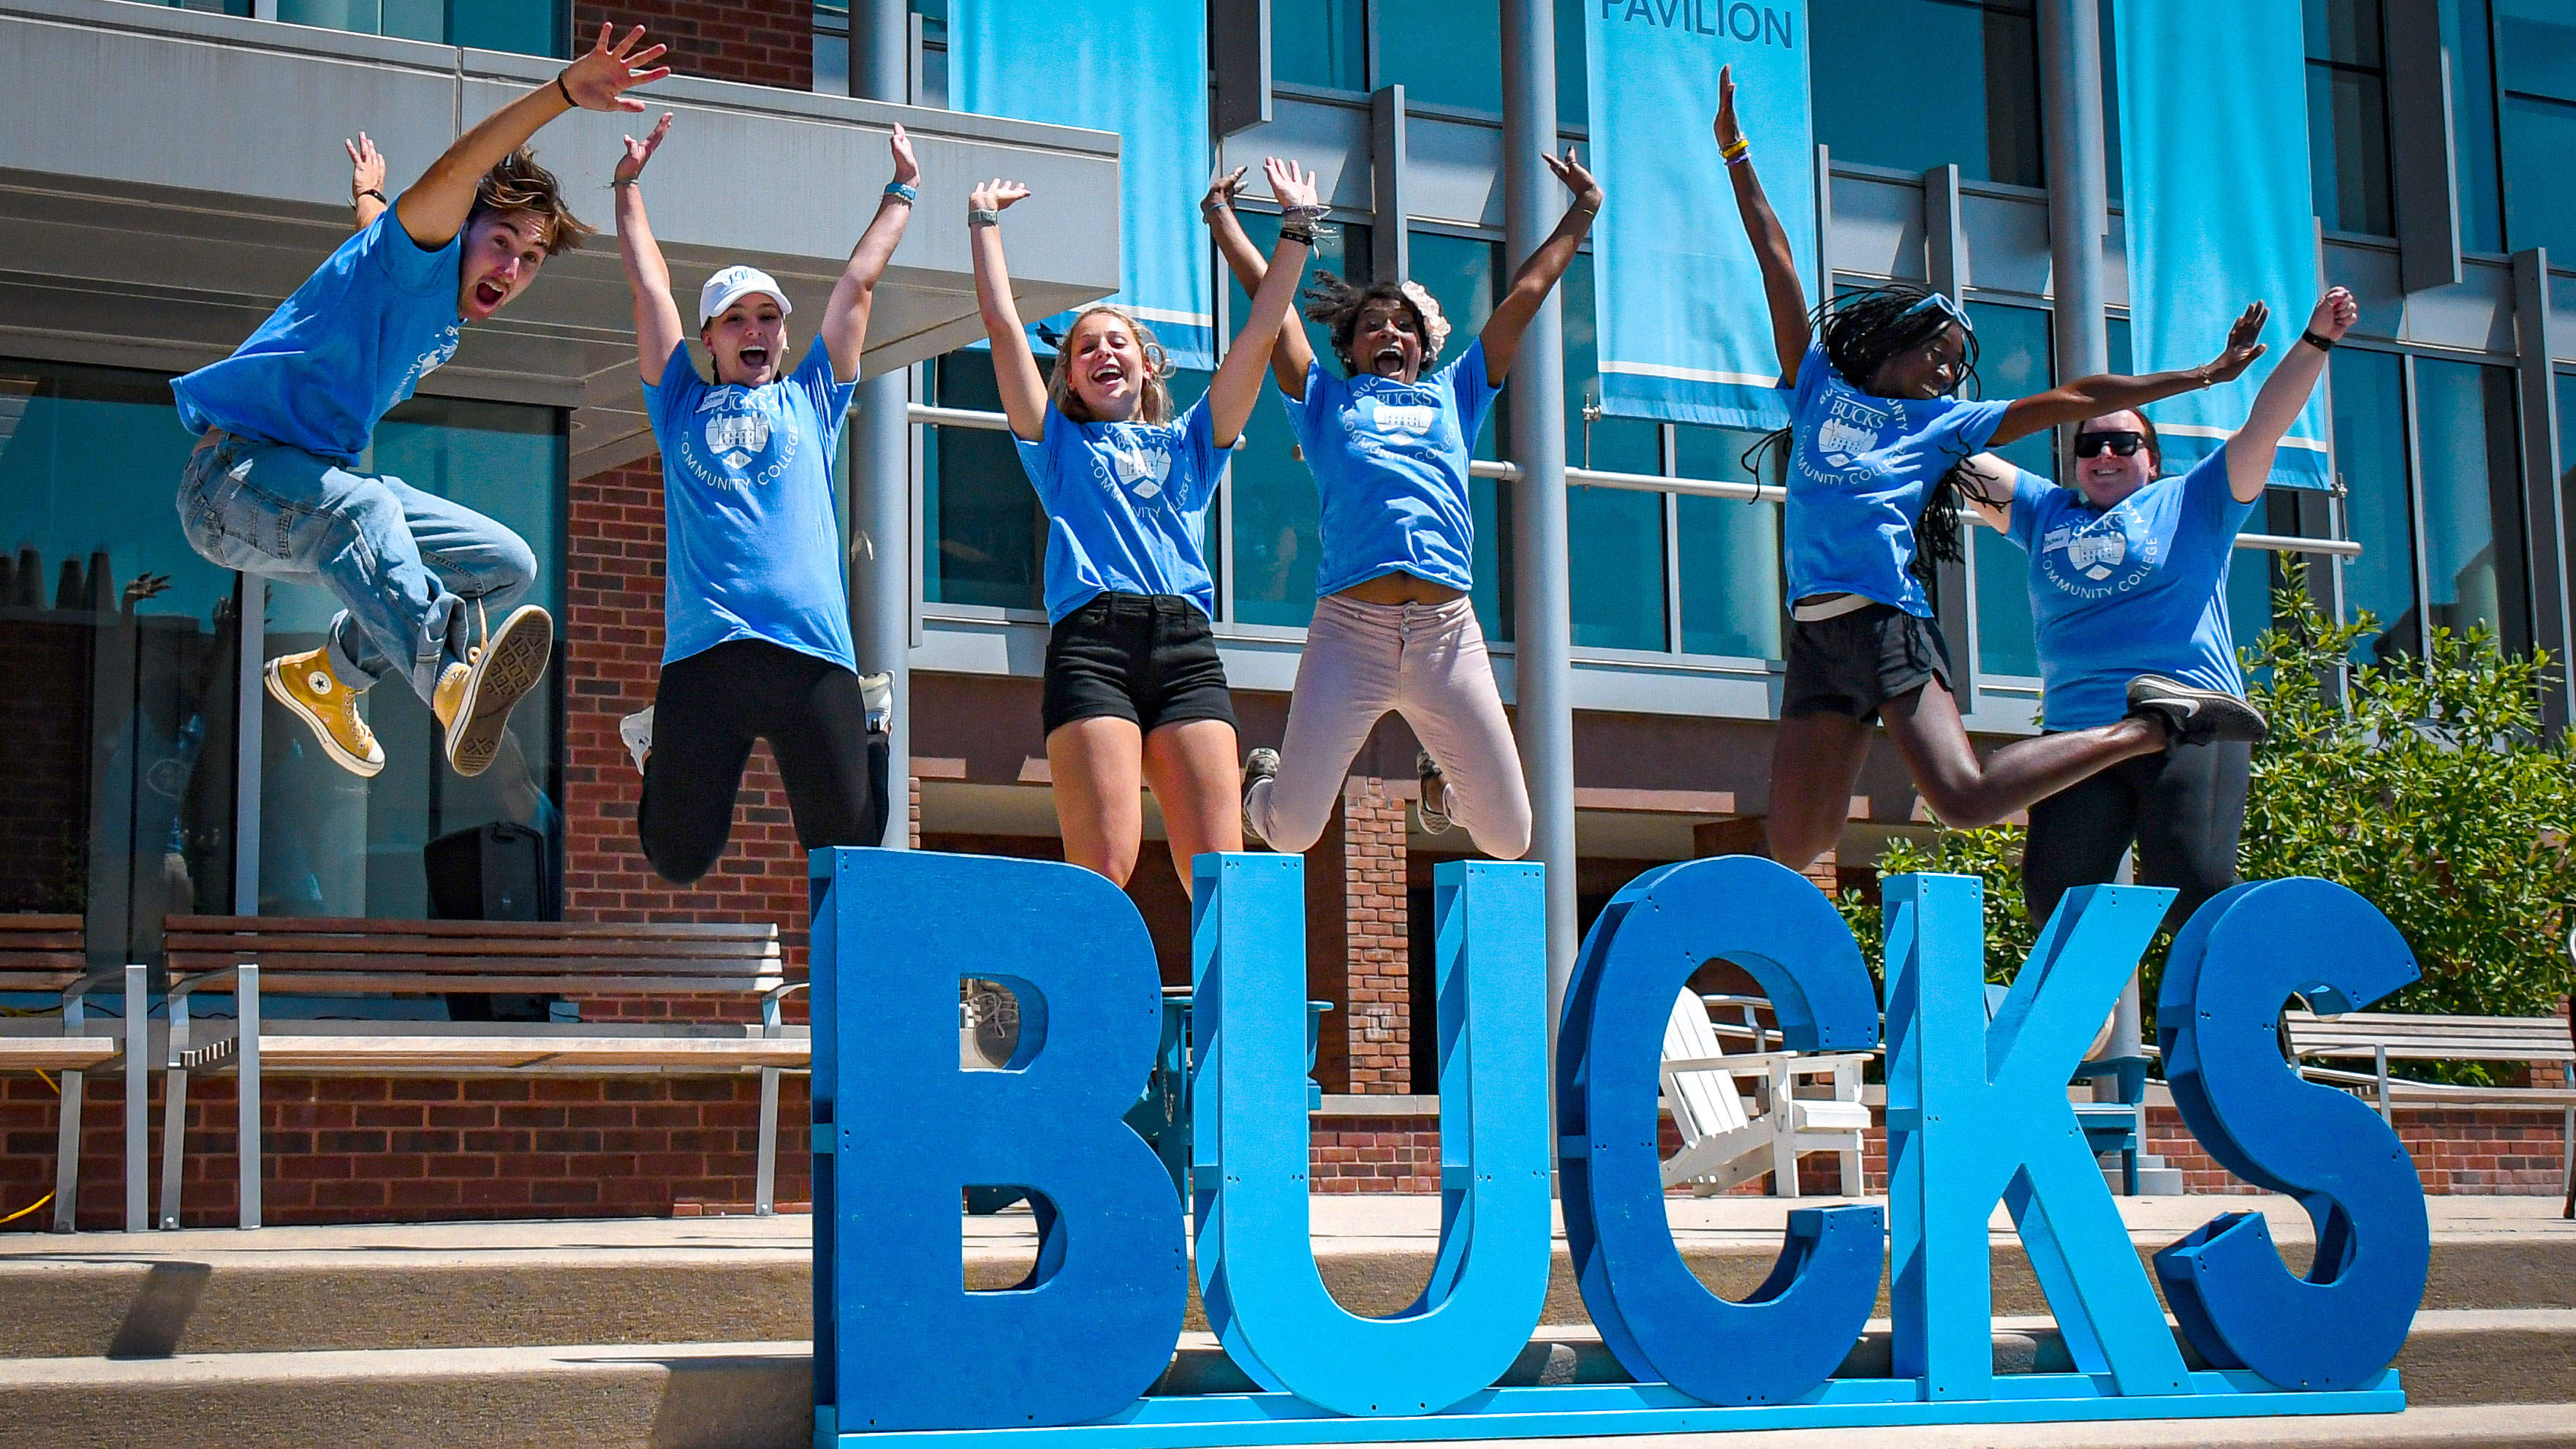 Excited group of students in blue Bucks t-shirts jumping in the air